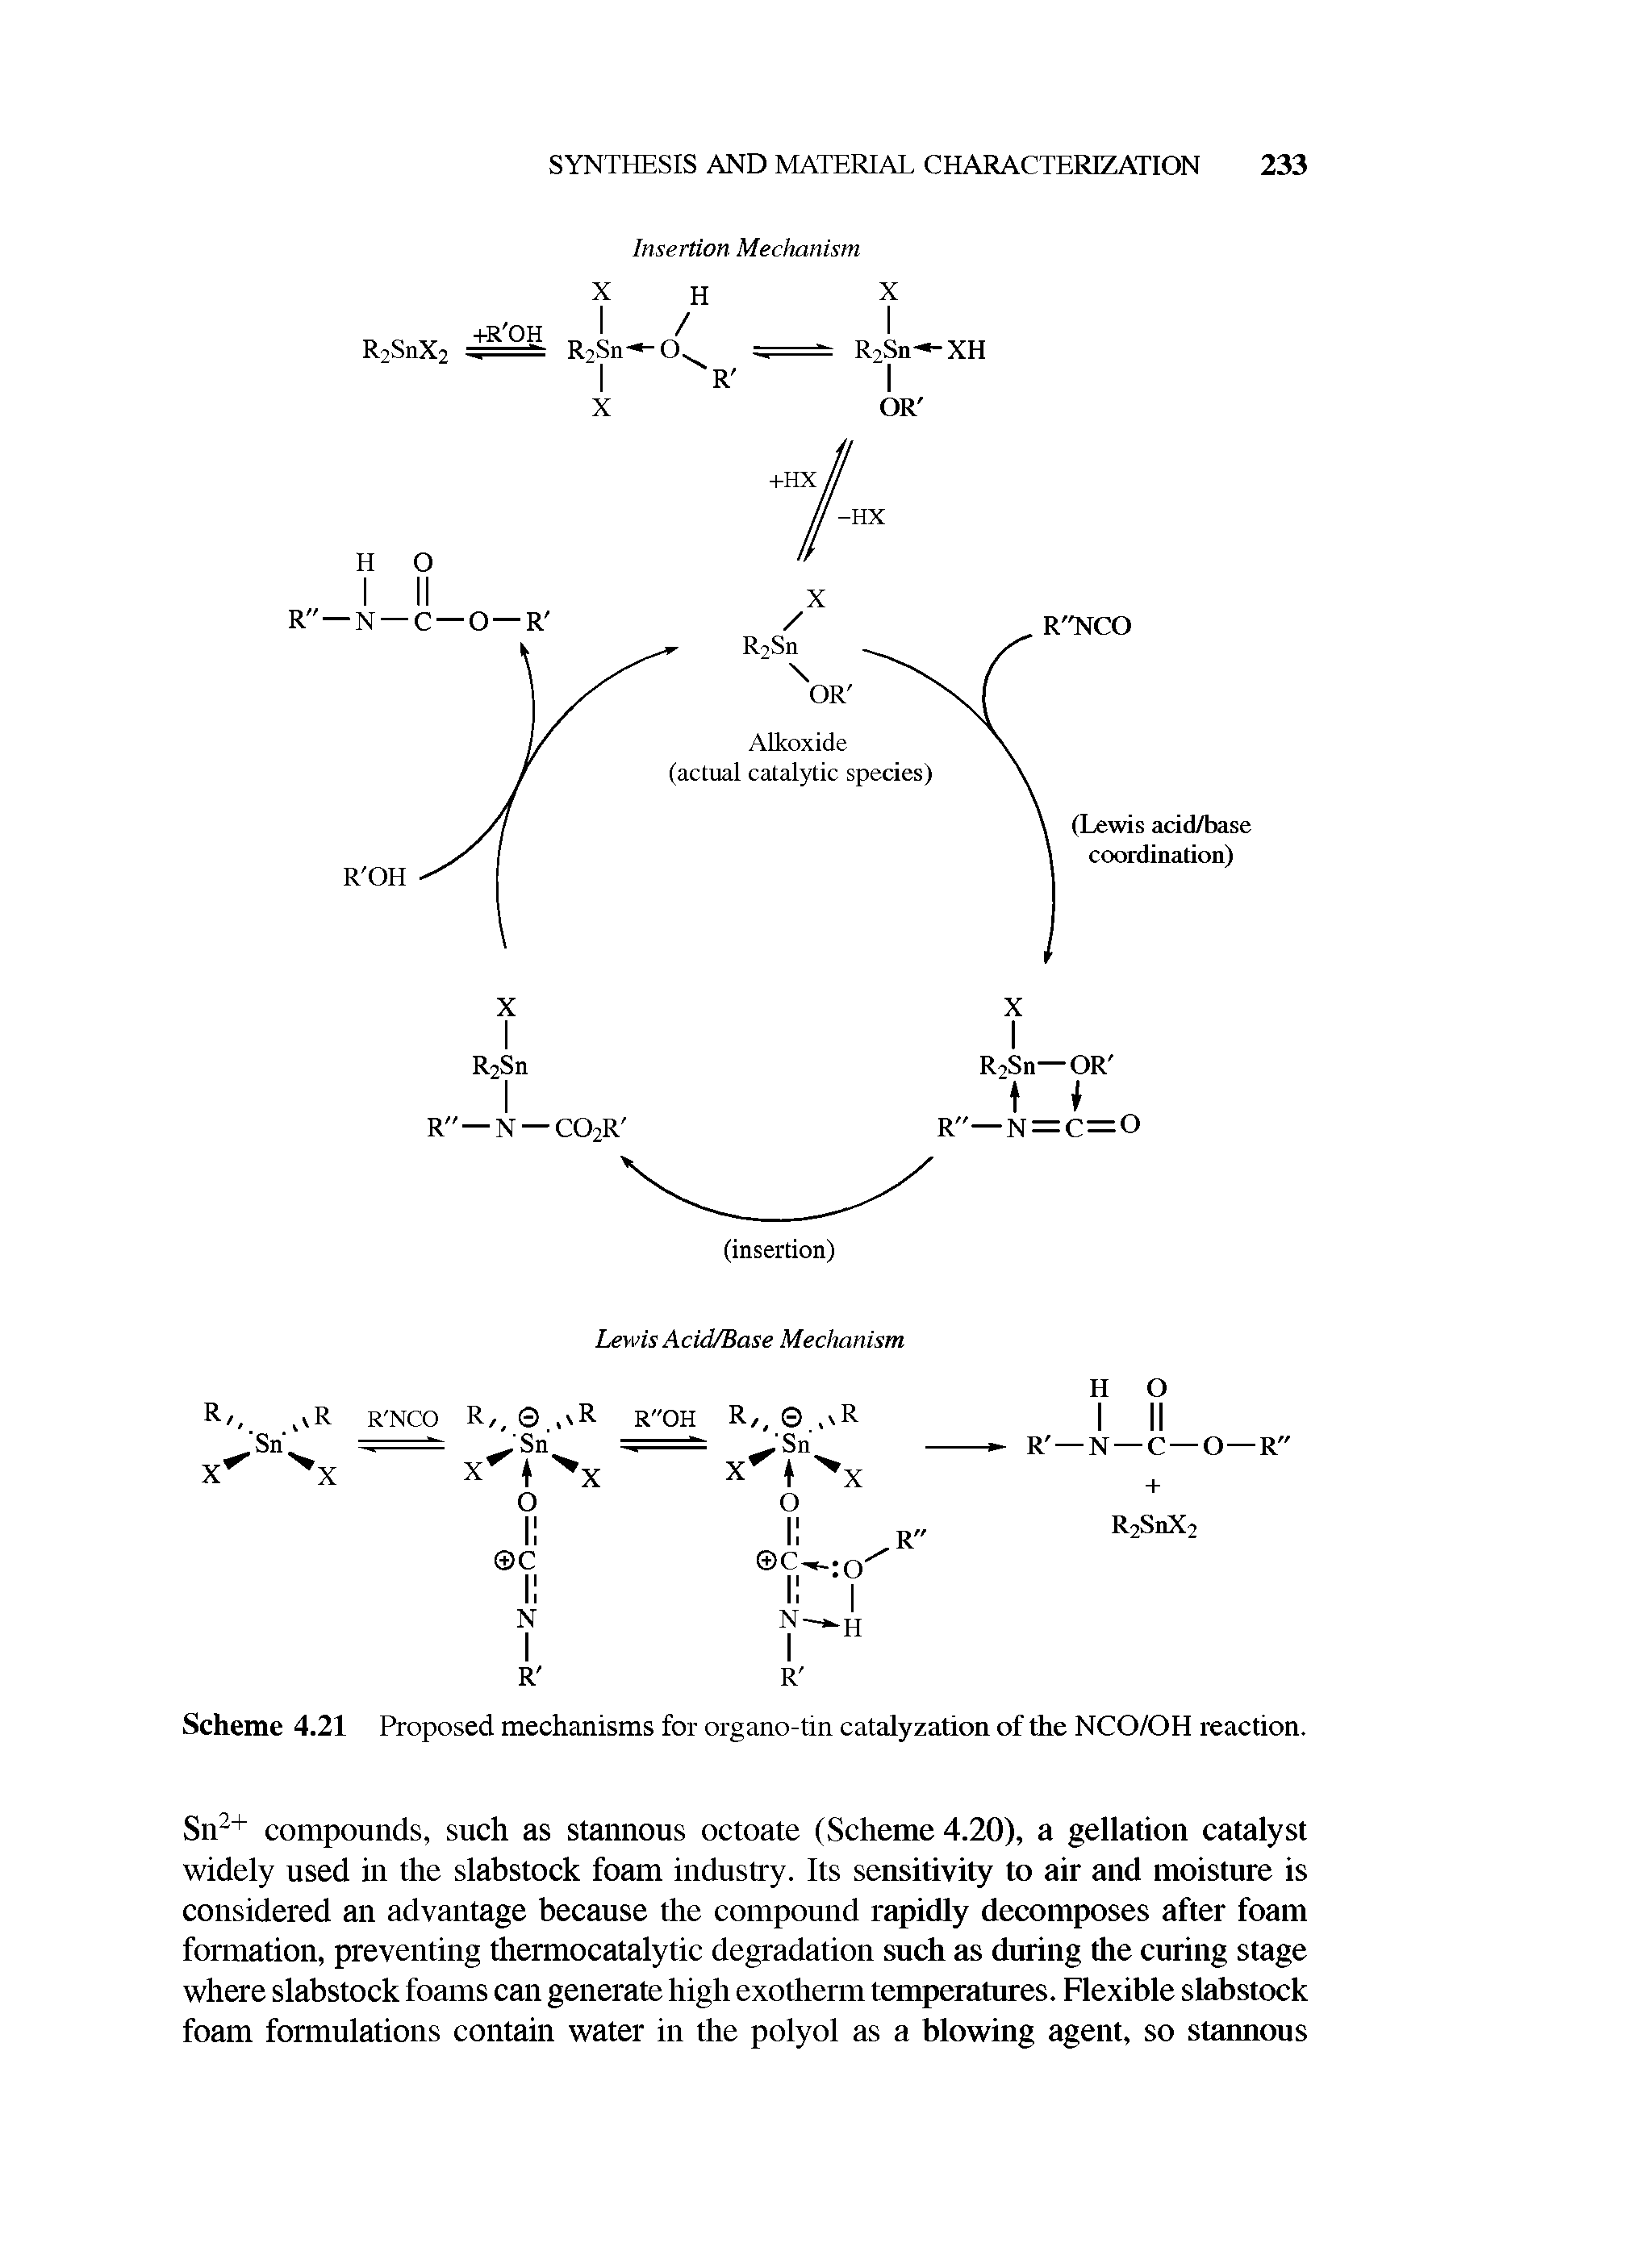 Scheme 4.21 Proposed mechanisms for organo-tin catalyzation of the NCO/OH reaction.